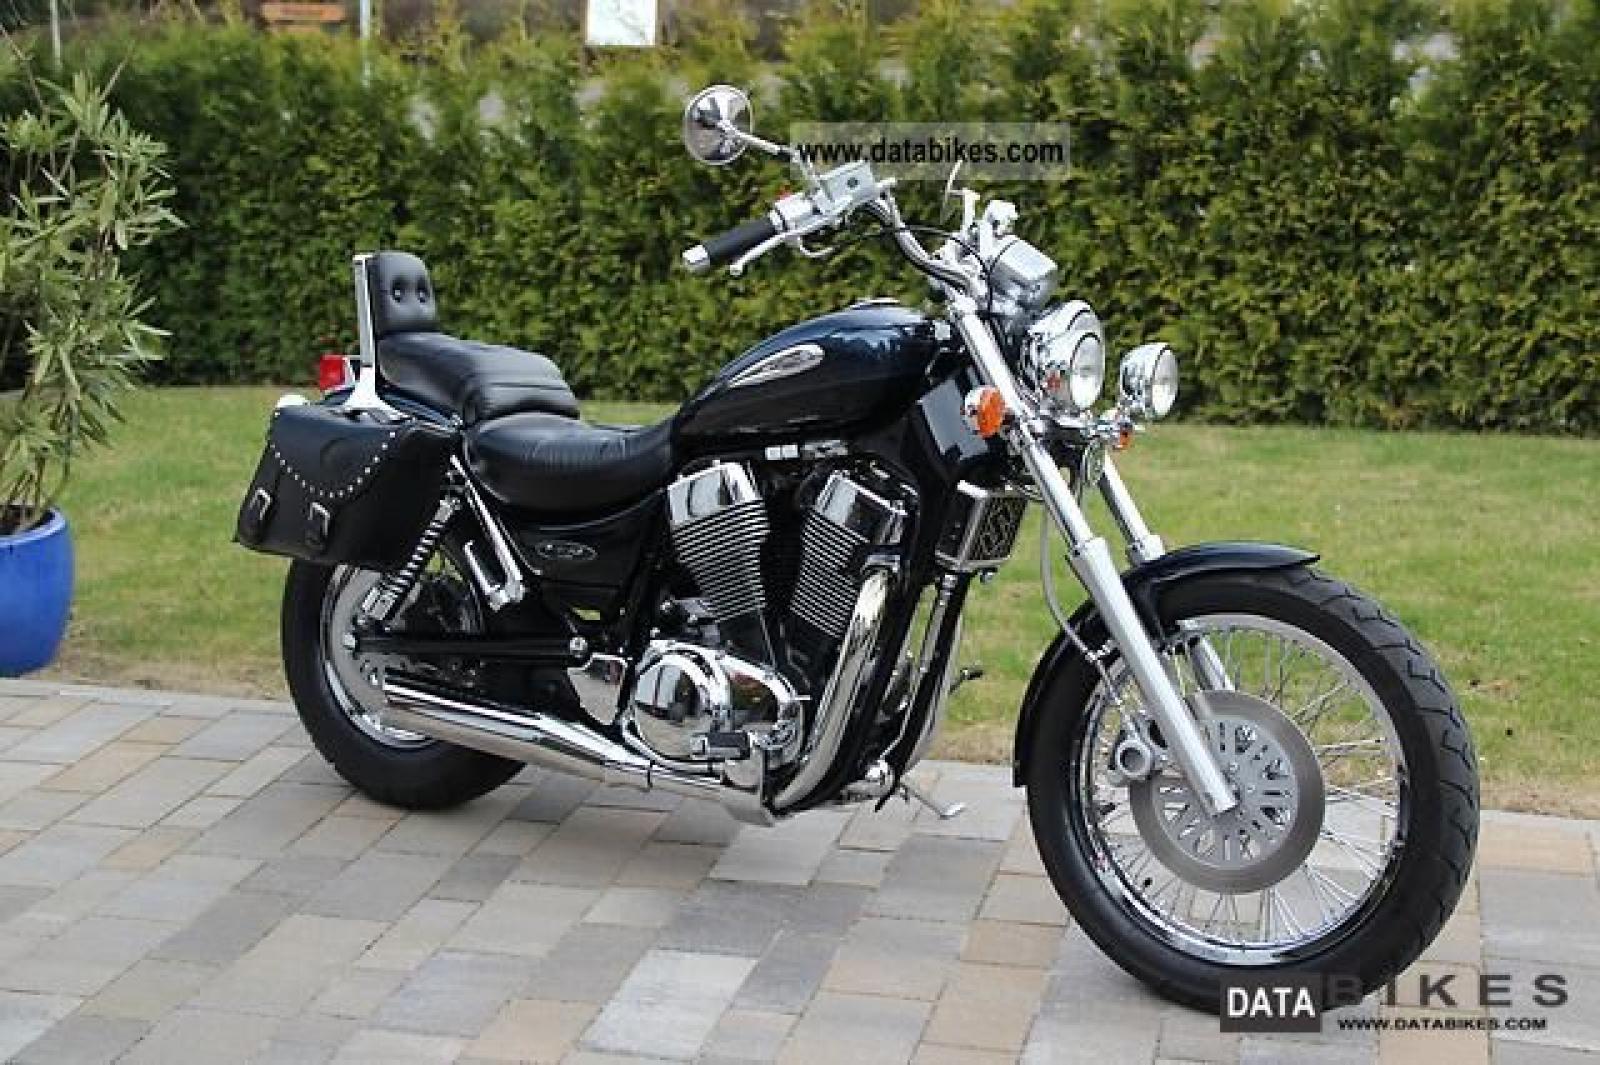 1997 Suzuki VS 1400 GLP Intruder specifications and pictures